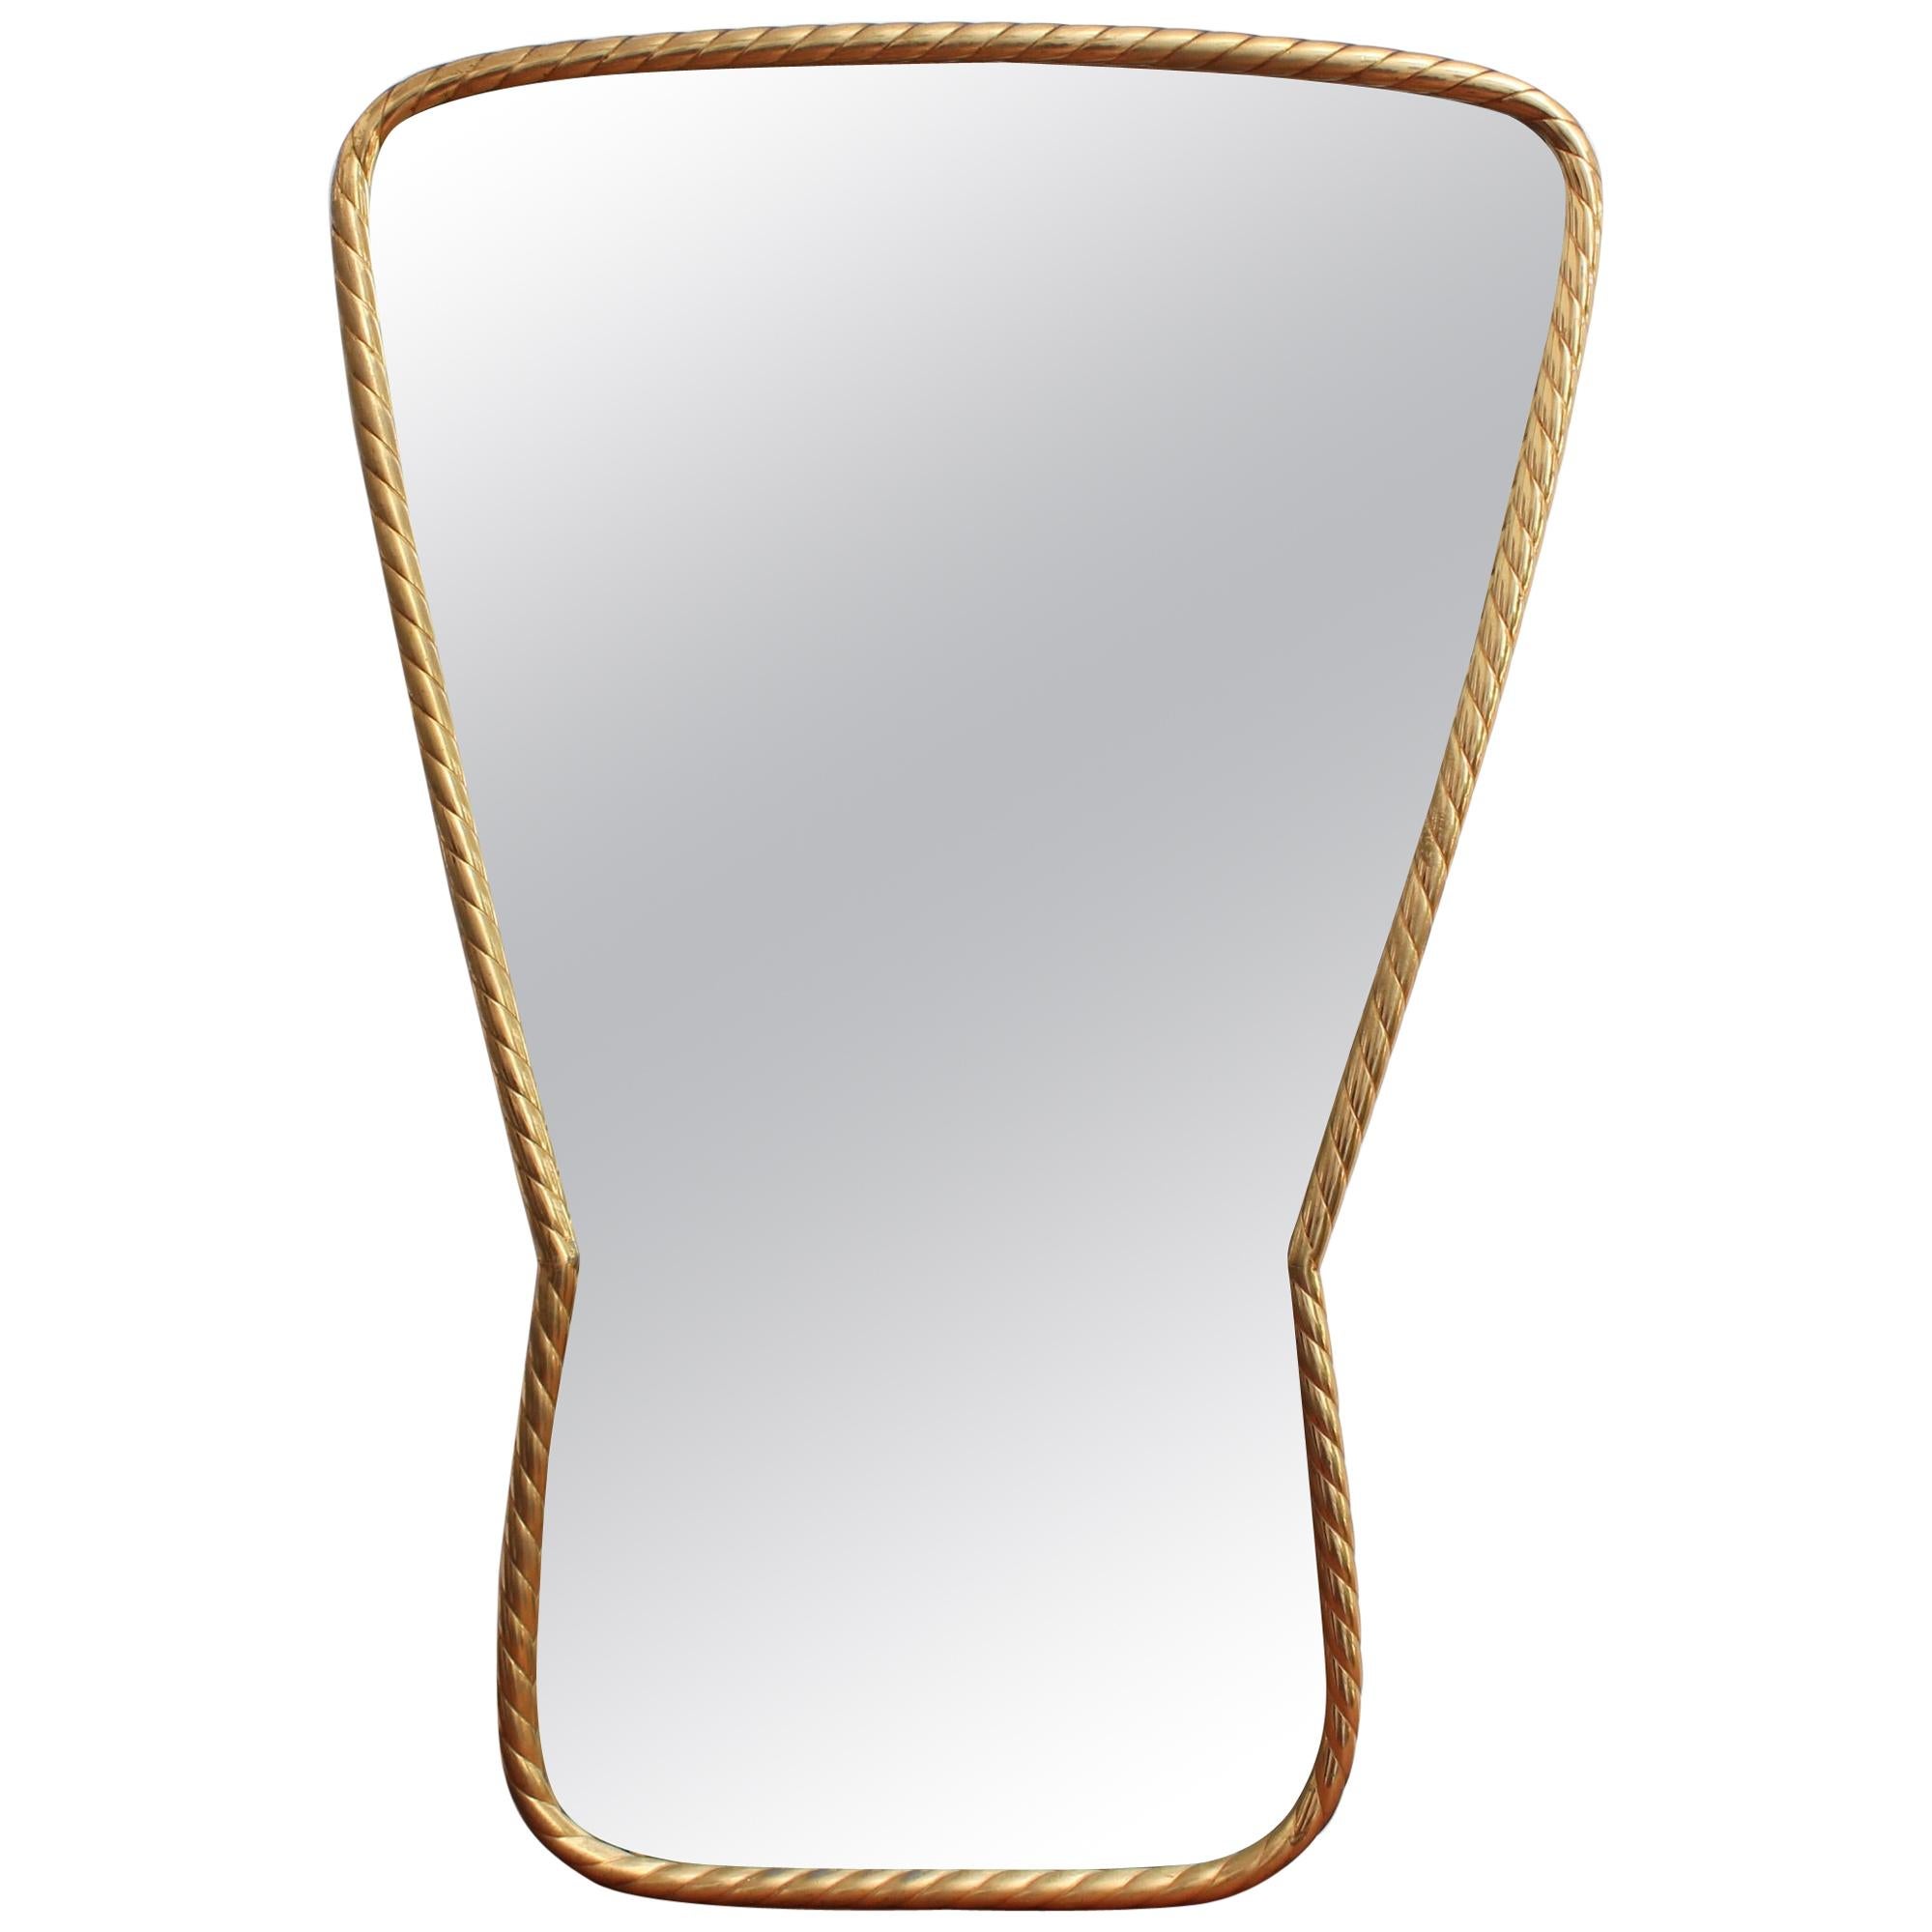 Midcentury Italian Keyhole-Shaped Wall Mirror with Rope Pattern Brass Frame